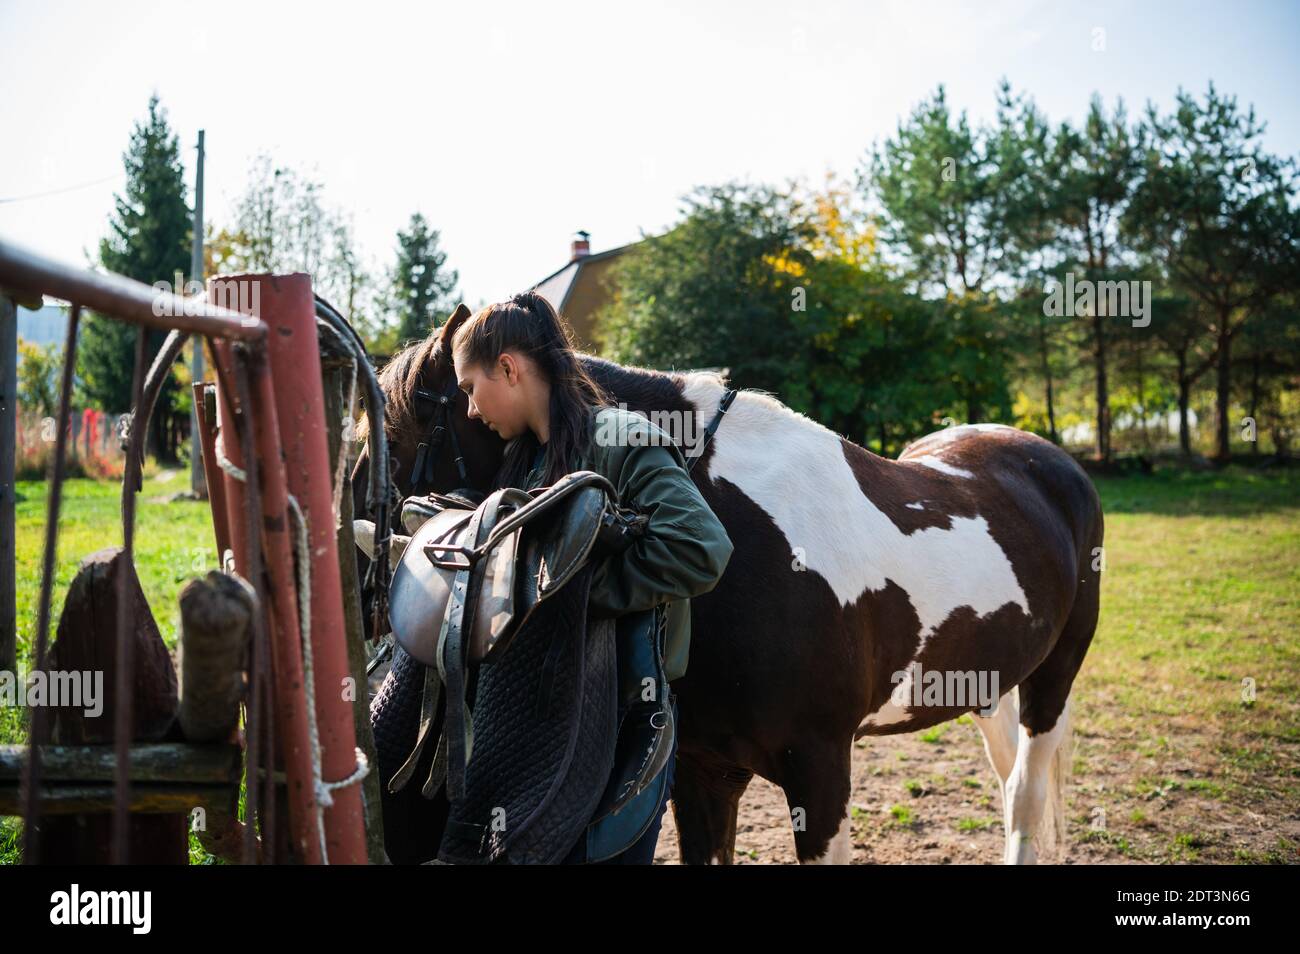 After a ride, the jockey unsaddles the horse next to the fence at the ranch. Stock Photo